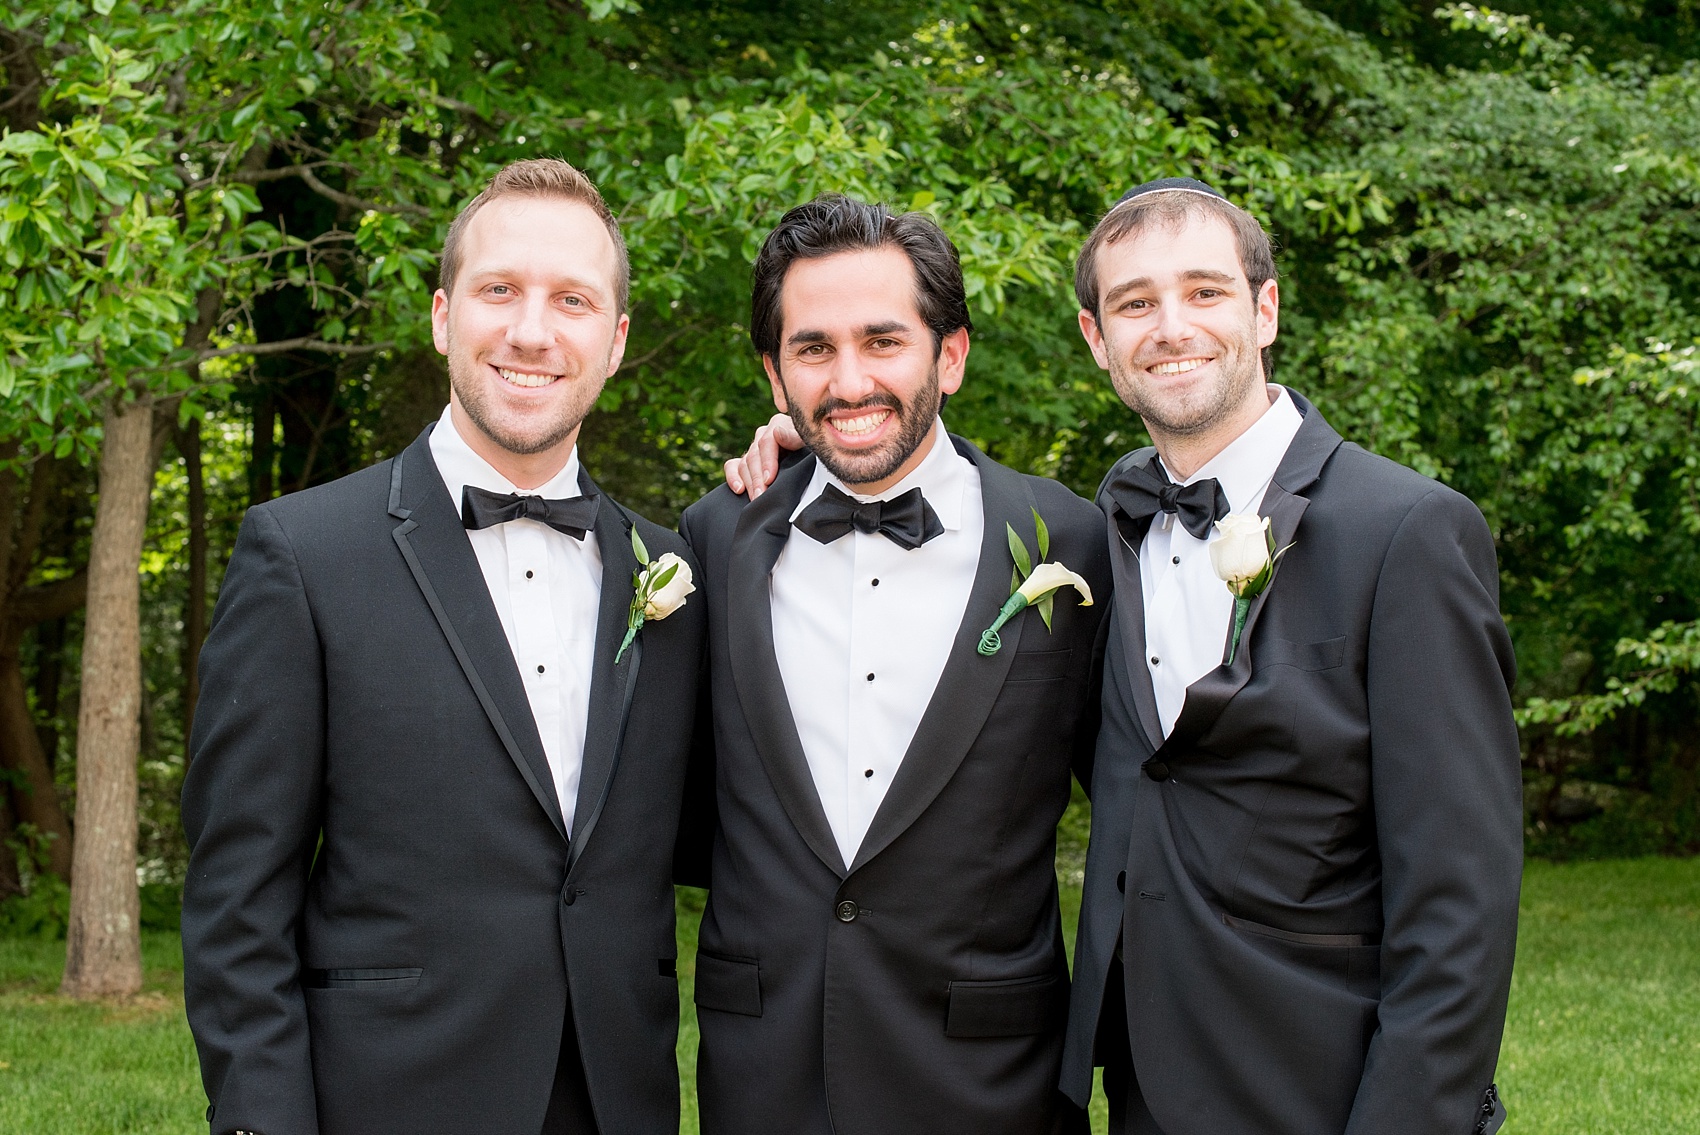 Mikkel Paige Photography photo of the groom and his groomsmen in classic black tuxedos for an orthodox Jewish wedding at Temple Emanu-El in Closter, NJ.